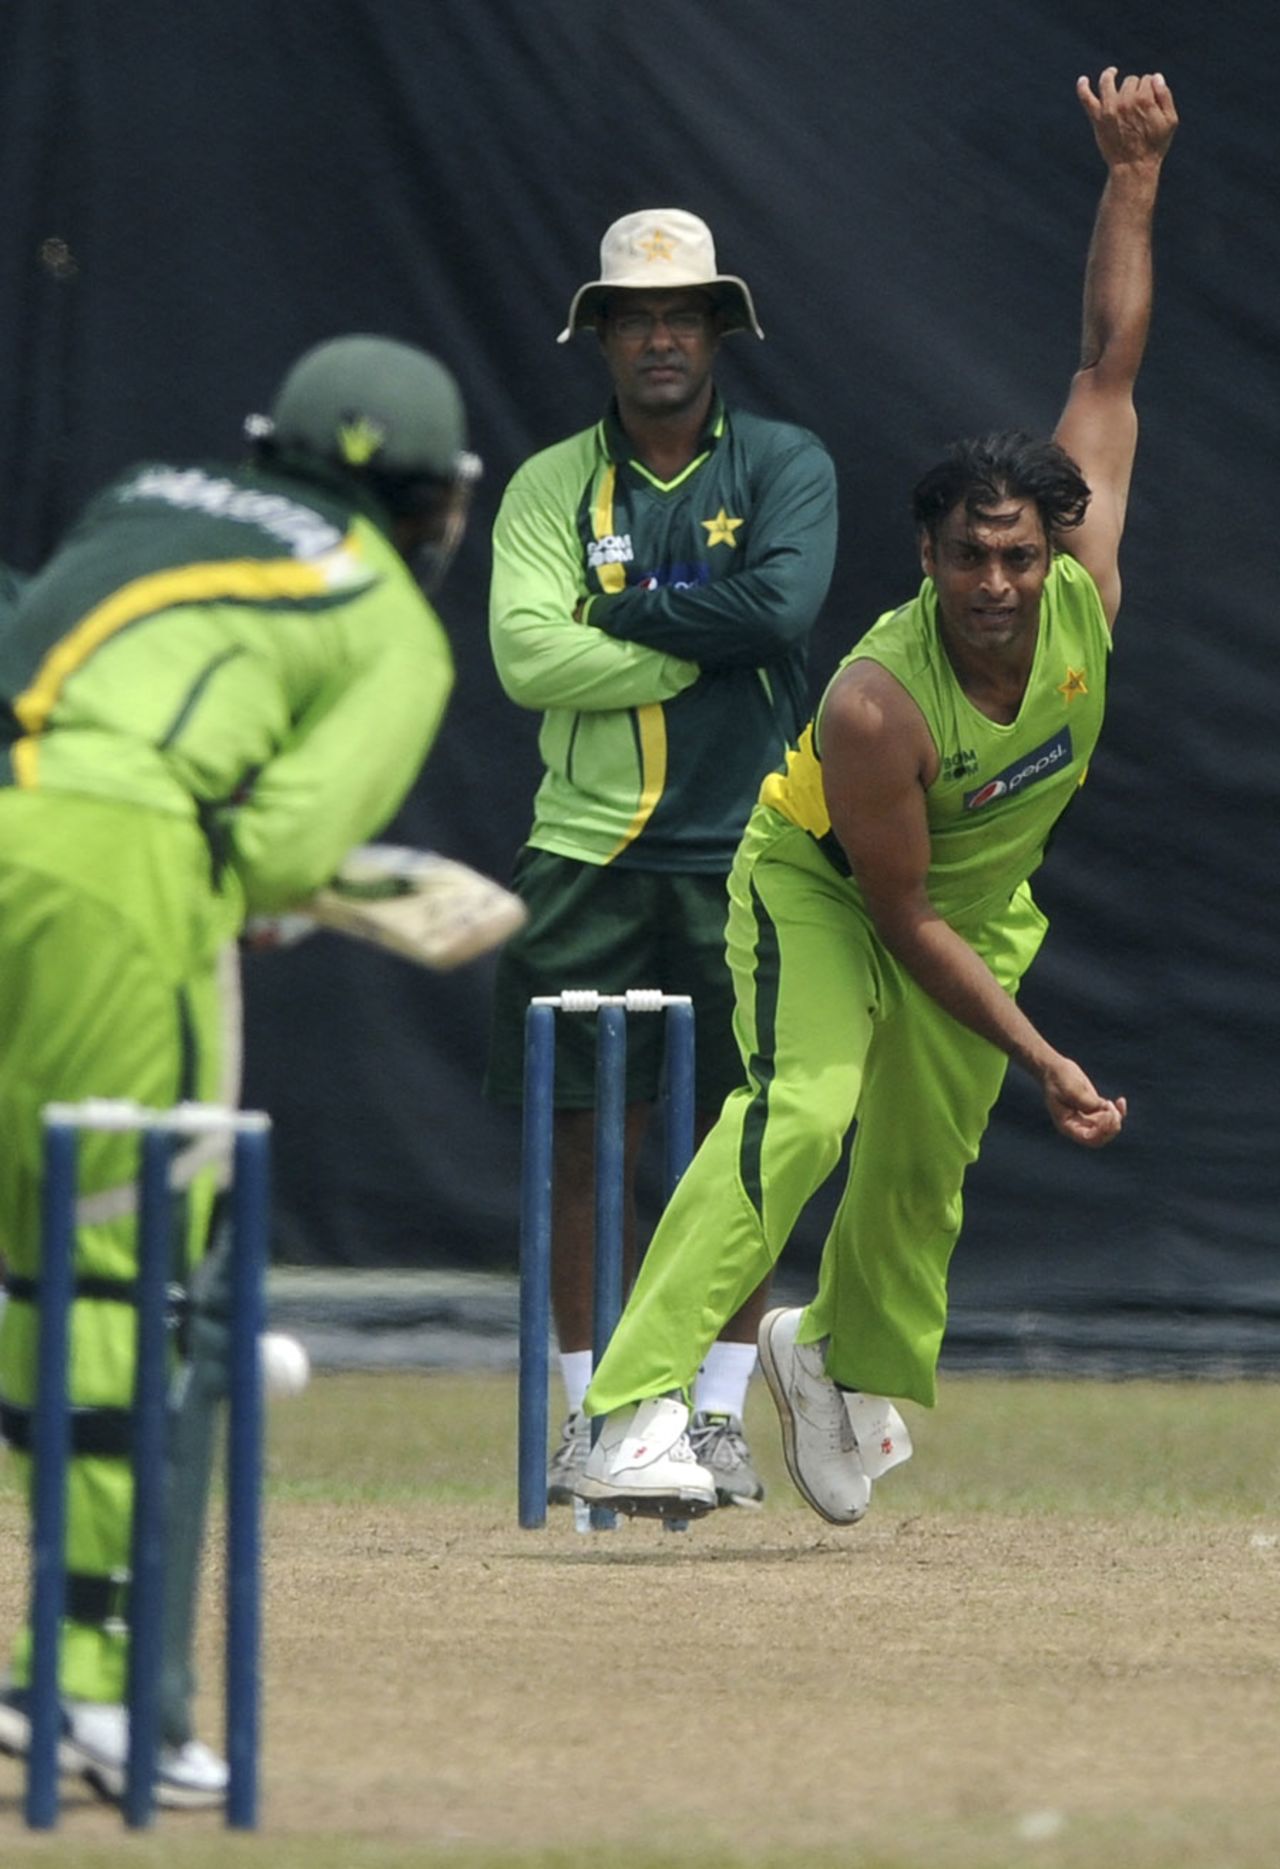 Shoaib Akhtar bowls during Pakistan's training session as Waqar Younis looks on, Colombo, February 28, 2011